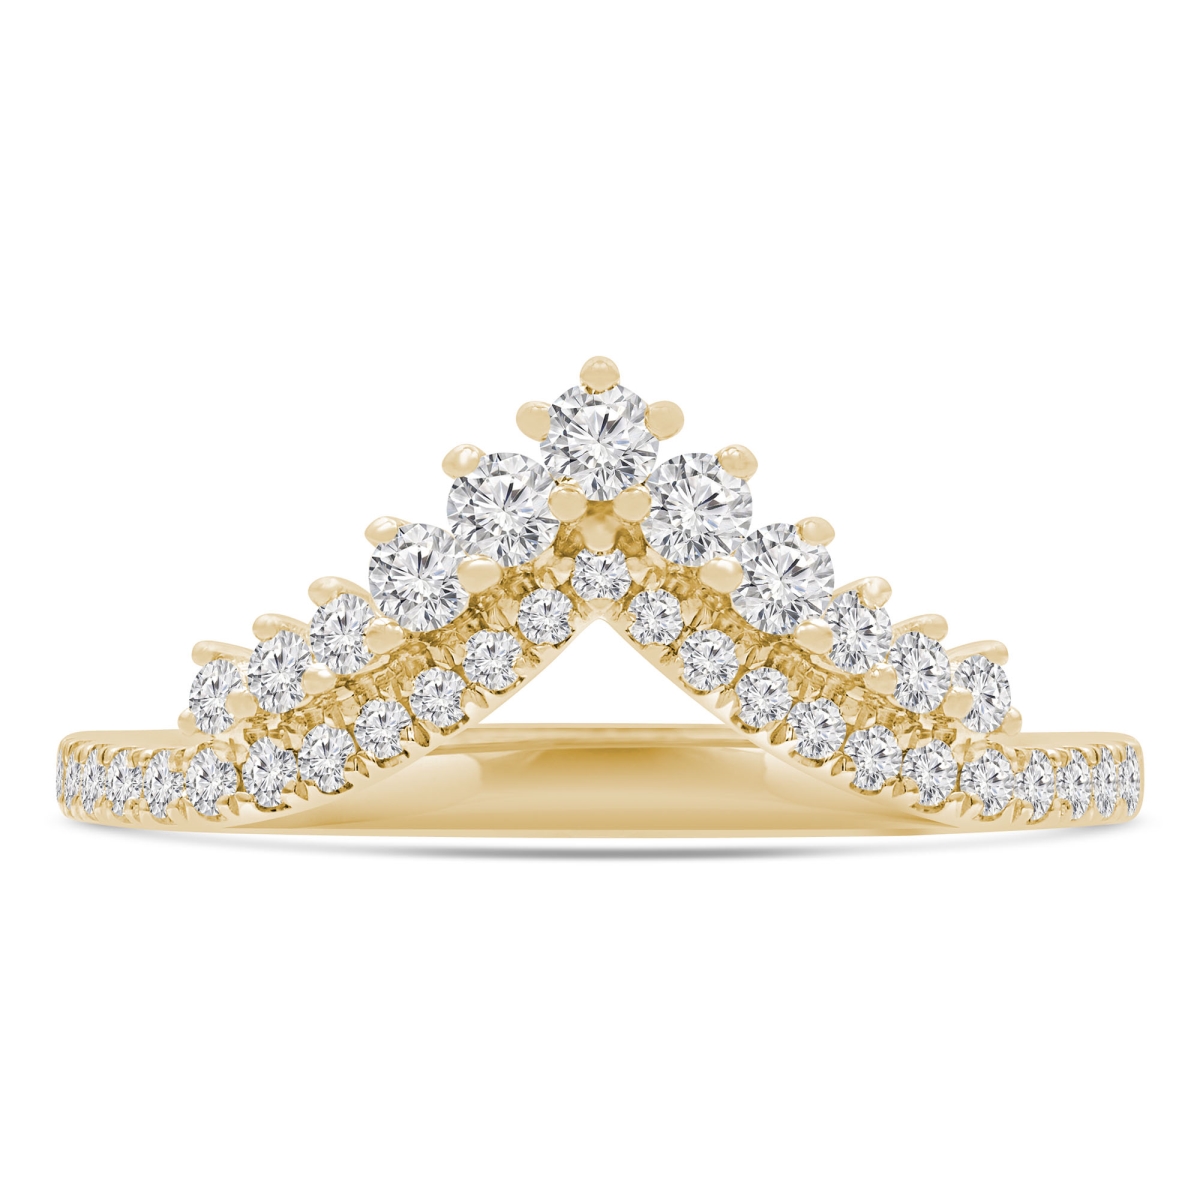 MDR220215-4 0.38 CTW Round Diamond Two-Row Tiara Shared Prong Semi-Eternity Anniversary Wedding Band Ring in 14K Yellow Gold - Size 4 -  Majesty Diamonds